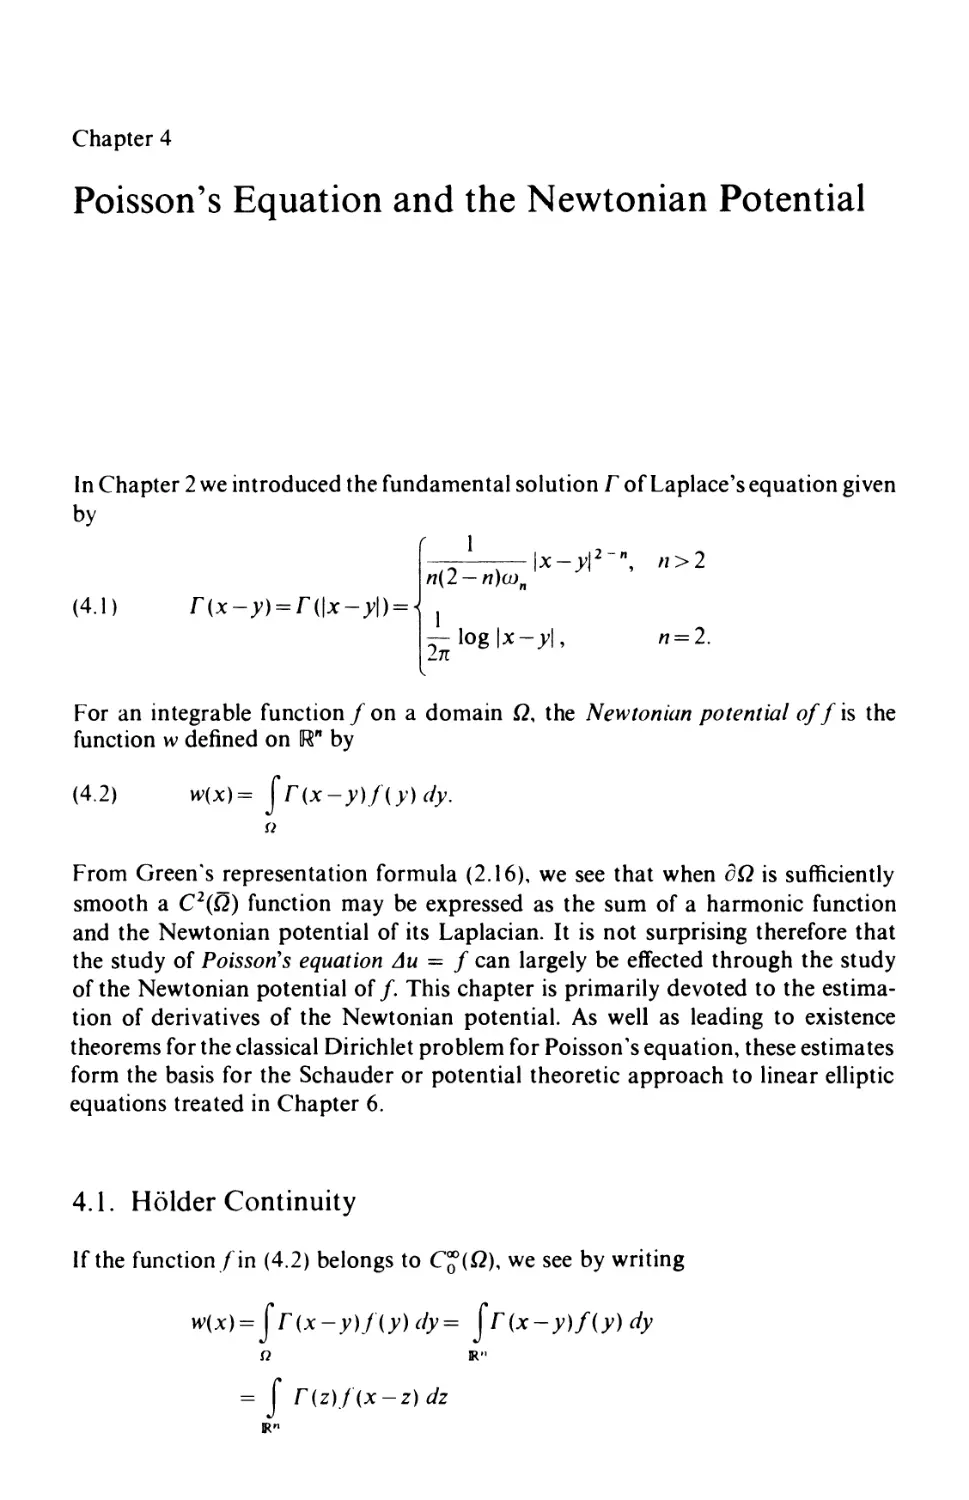 Chapter 4. Poisson's Equation and the Newtonian Potential